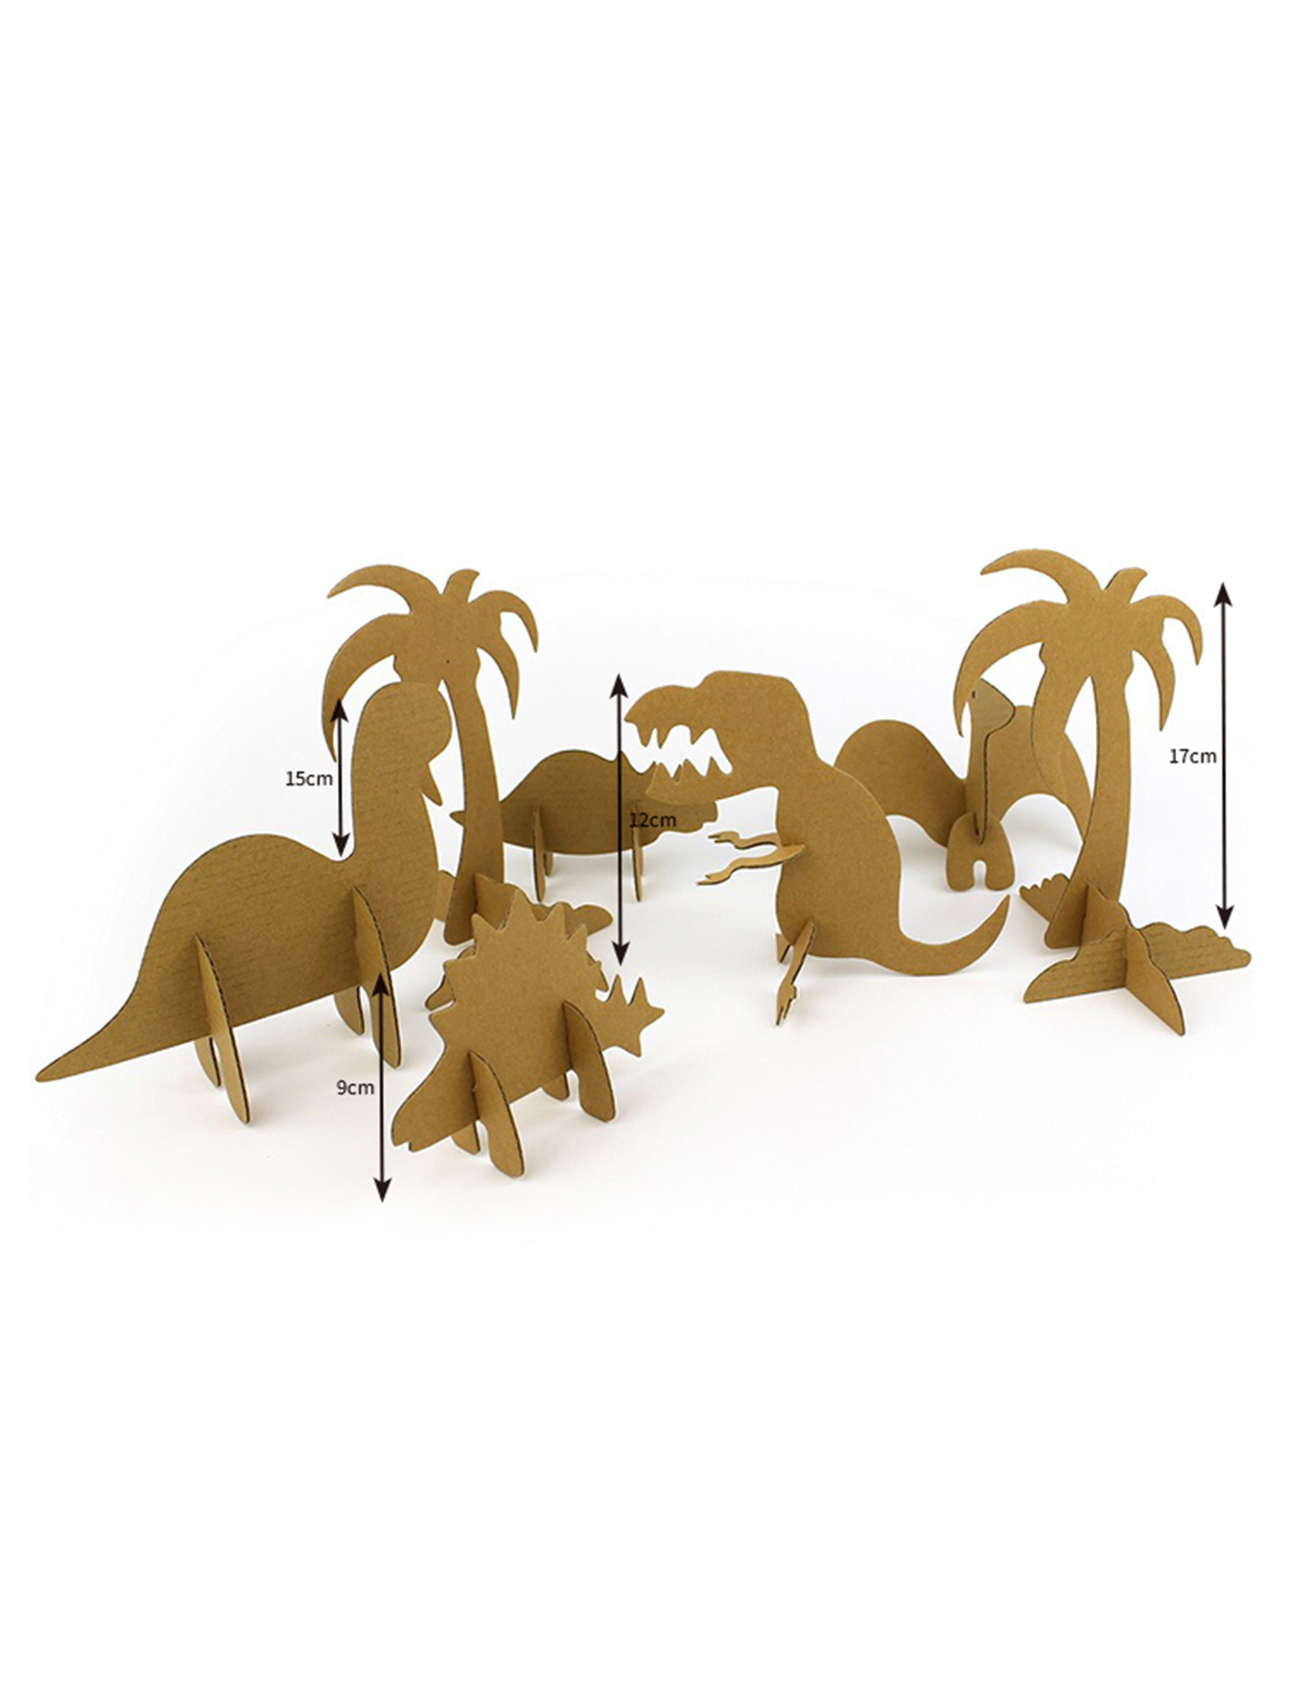 Dinosaur series 3D Puzzle Paper Model For kids assembling and doodling CG131 (3)